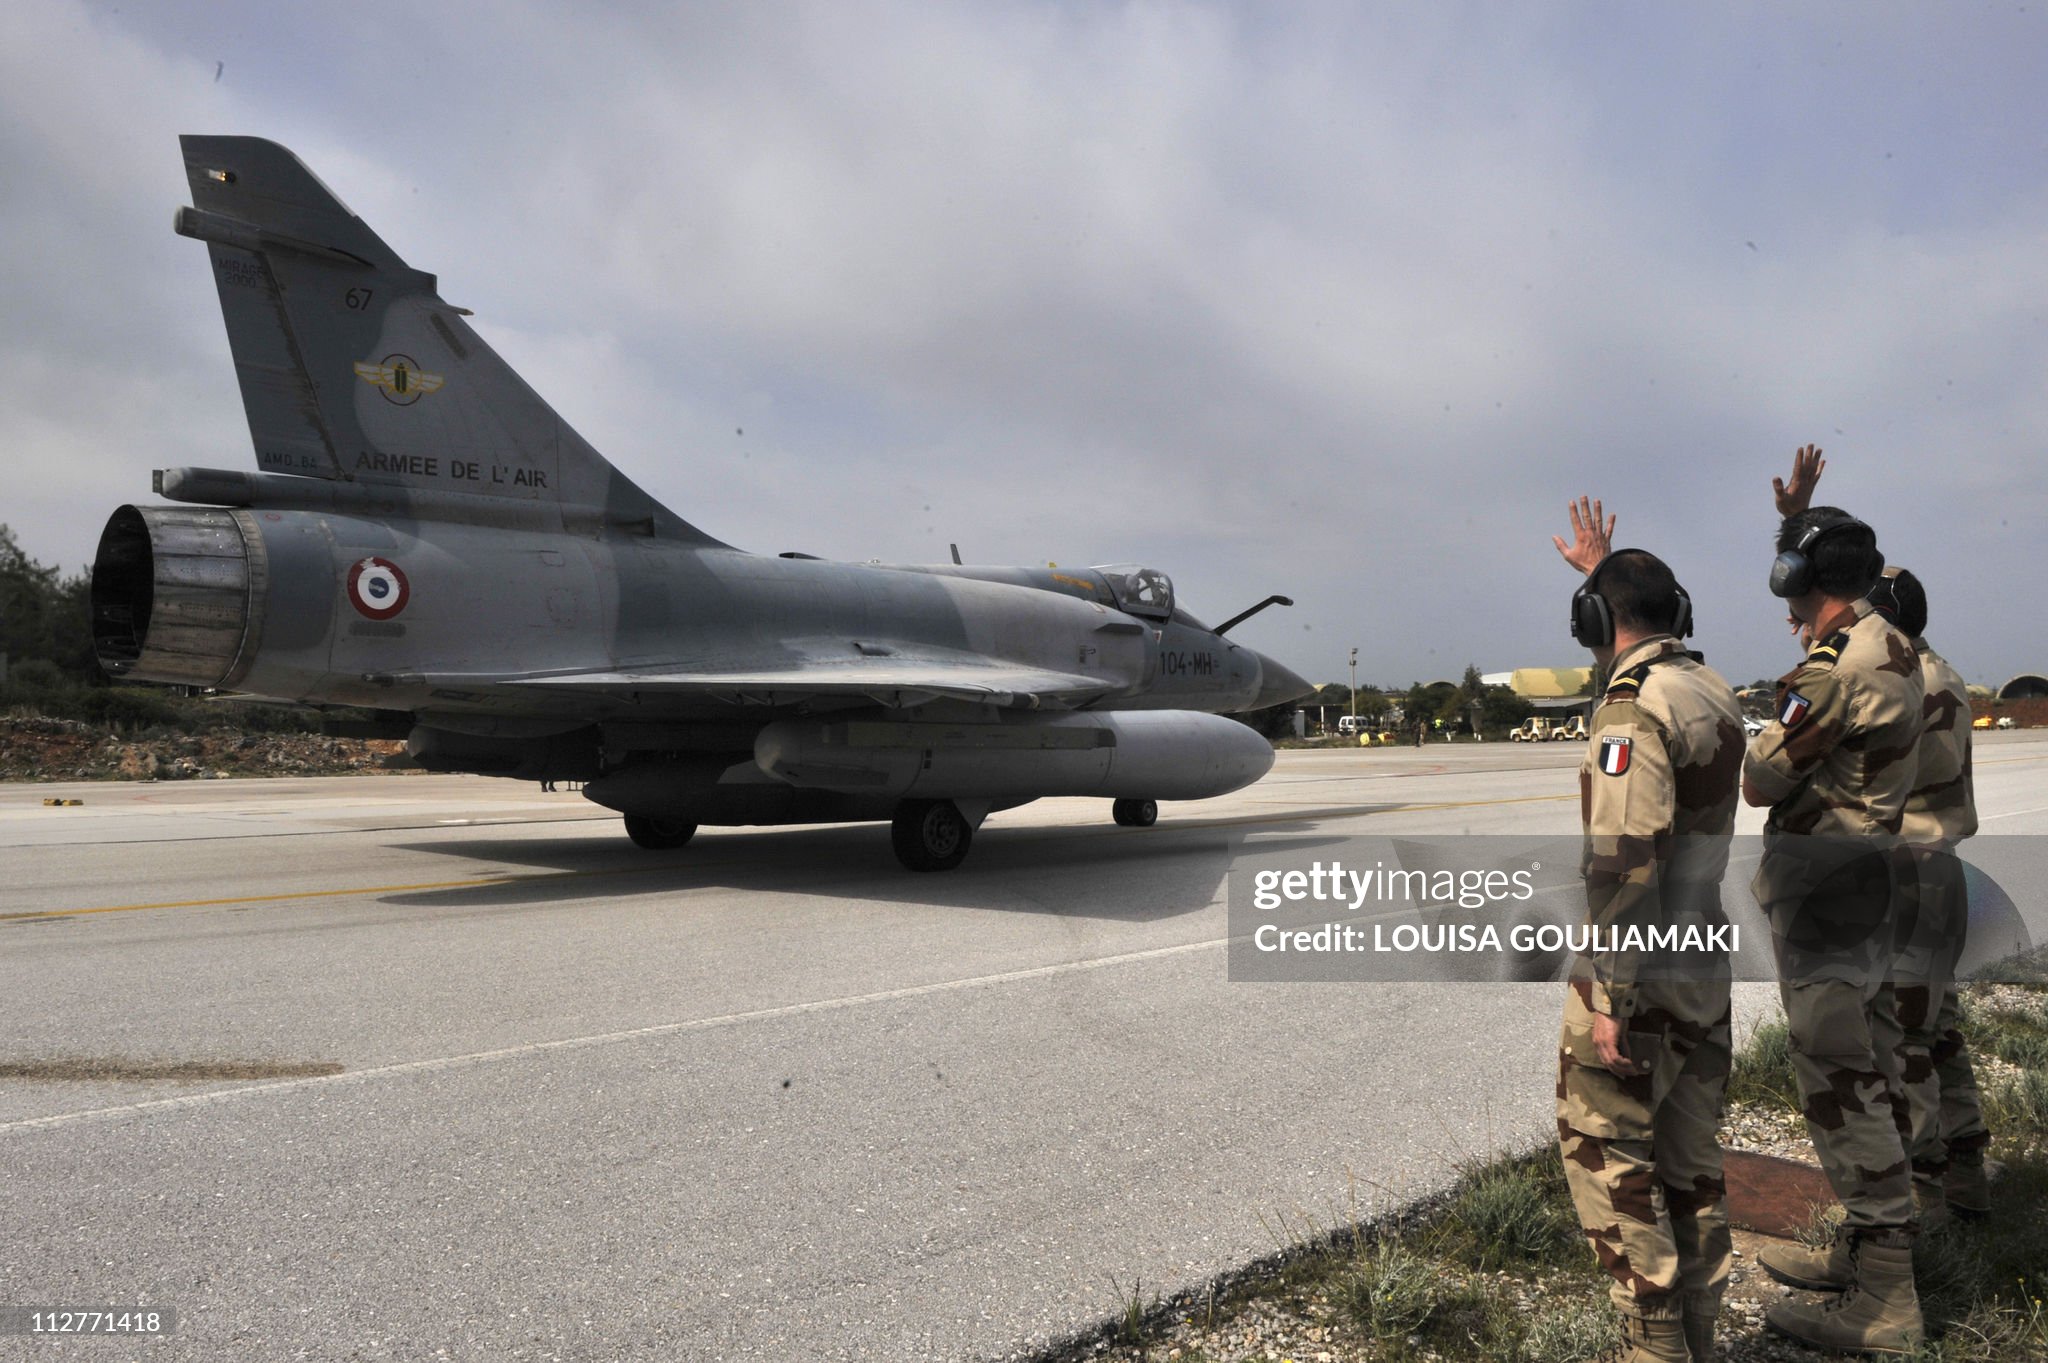 [Berna] Décals Mirage 2000-5F "Corse" - BD 72-127 / 48-153 / 32-075 Ground-staff-wave-at-a-french-mirage-2000-jet-pilot-taking-off-on-march-30-2011-from-the-souda